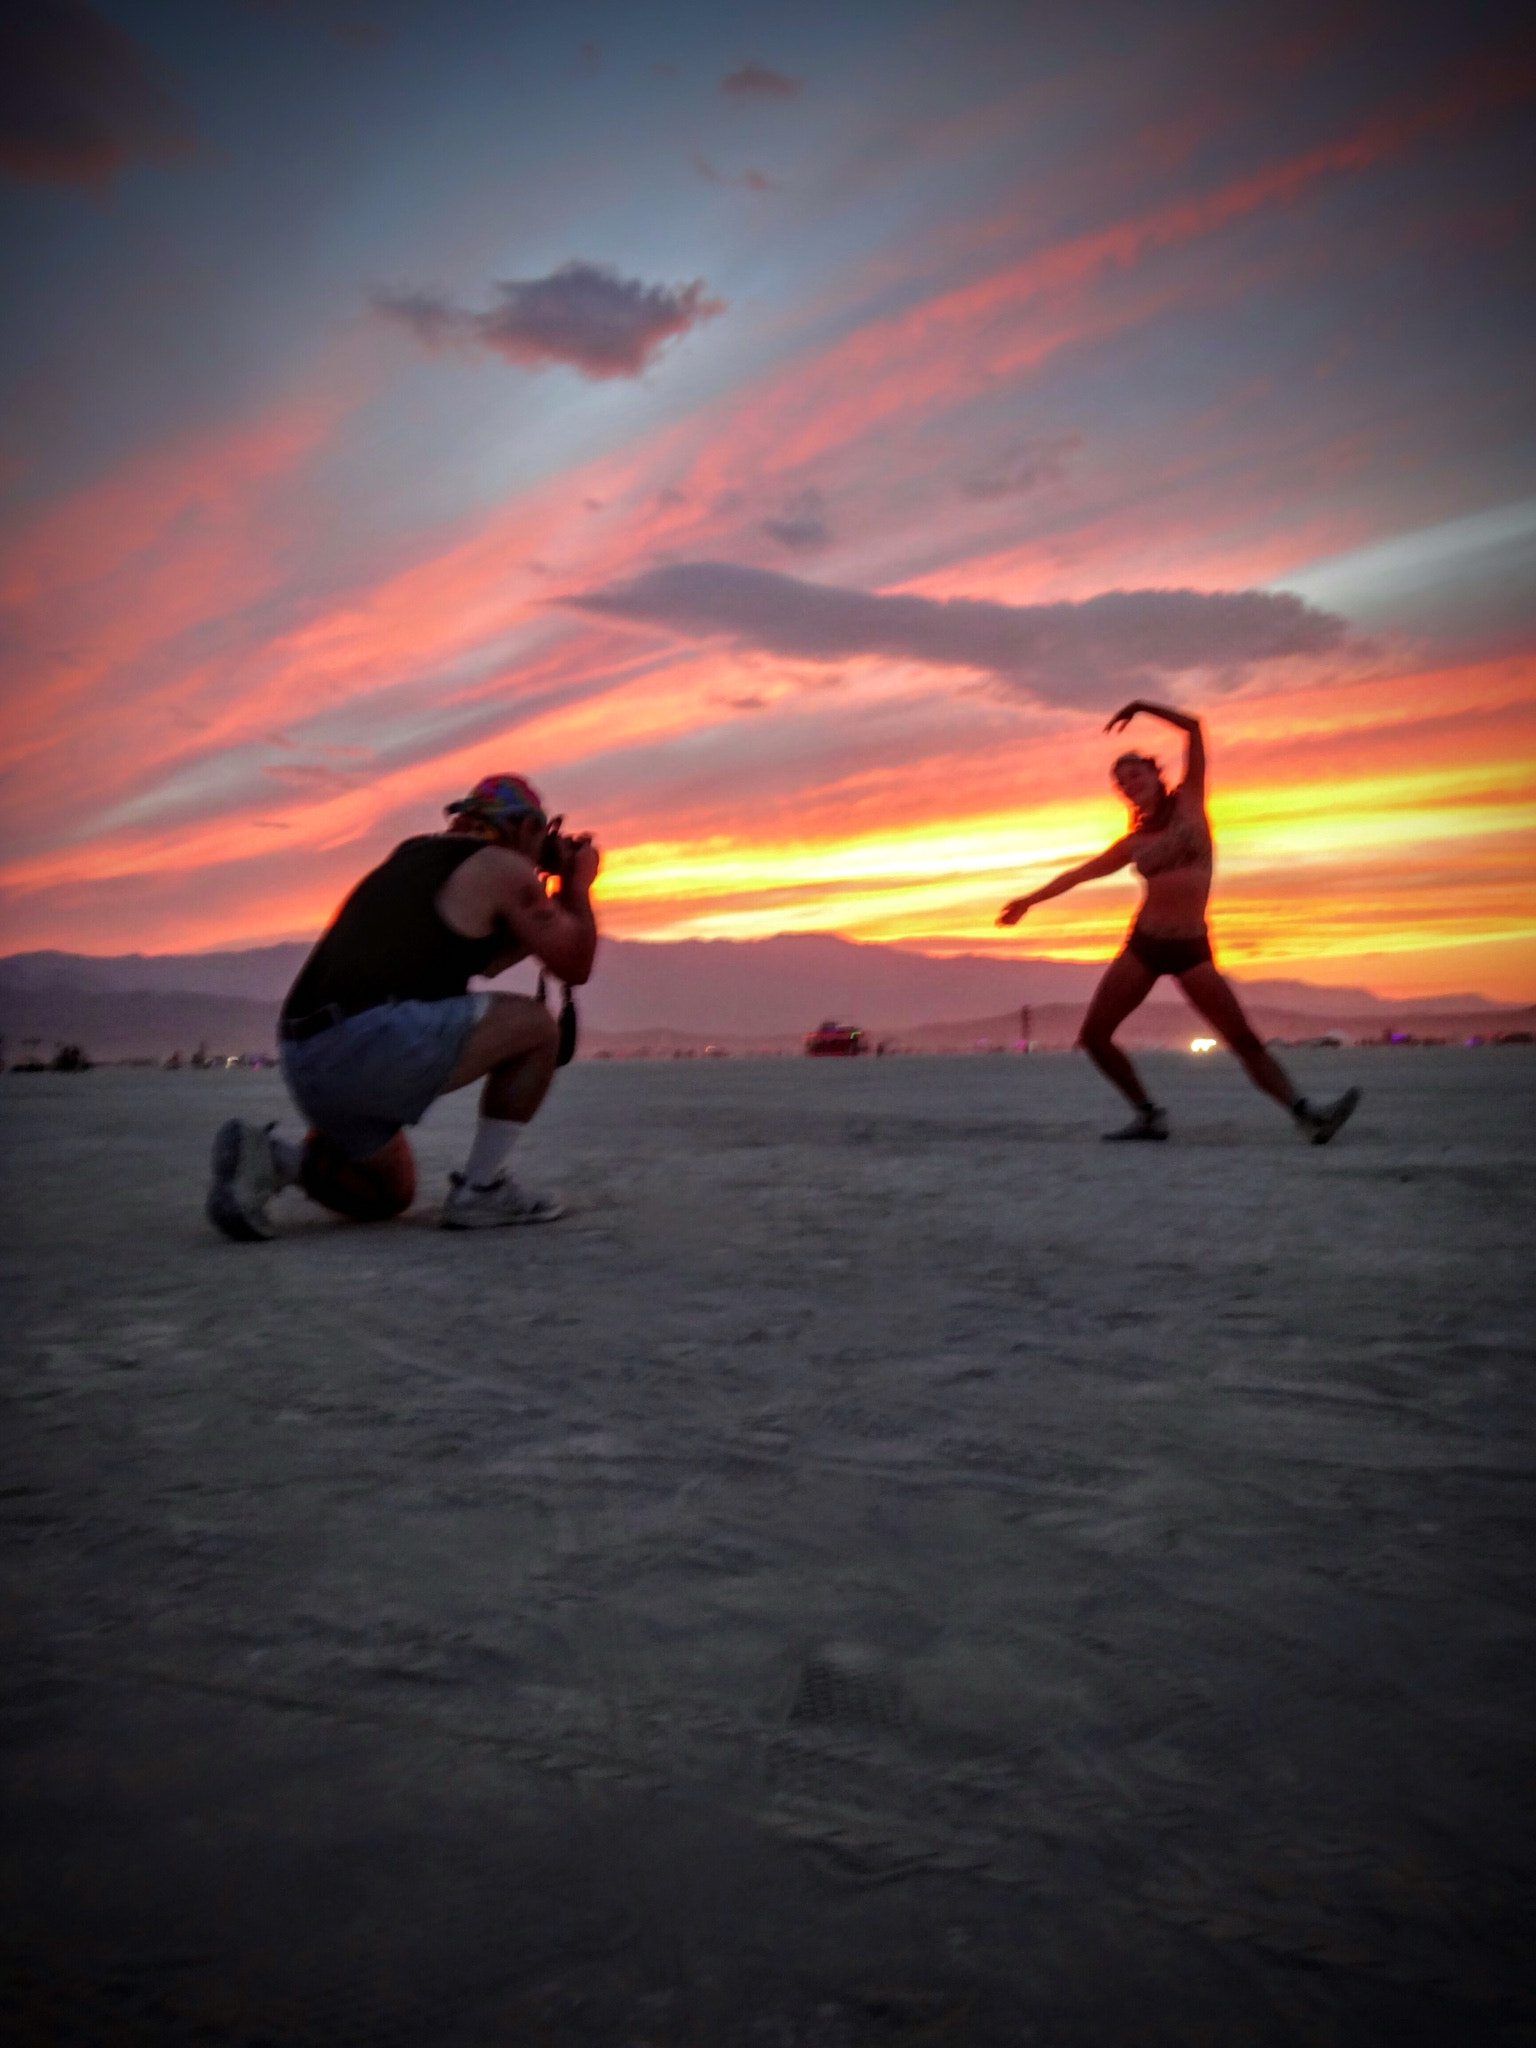 Sony Cyber-shot DSC-TX30 sample photo. My pal in #action at #burningman photography